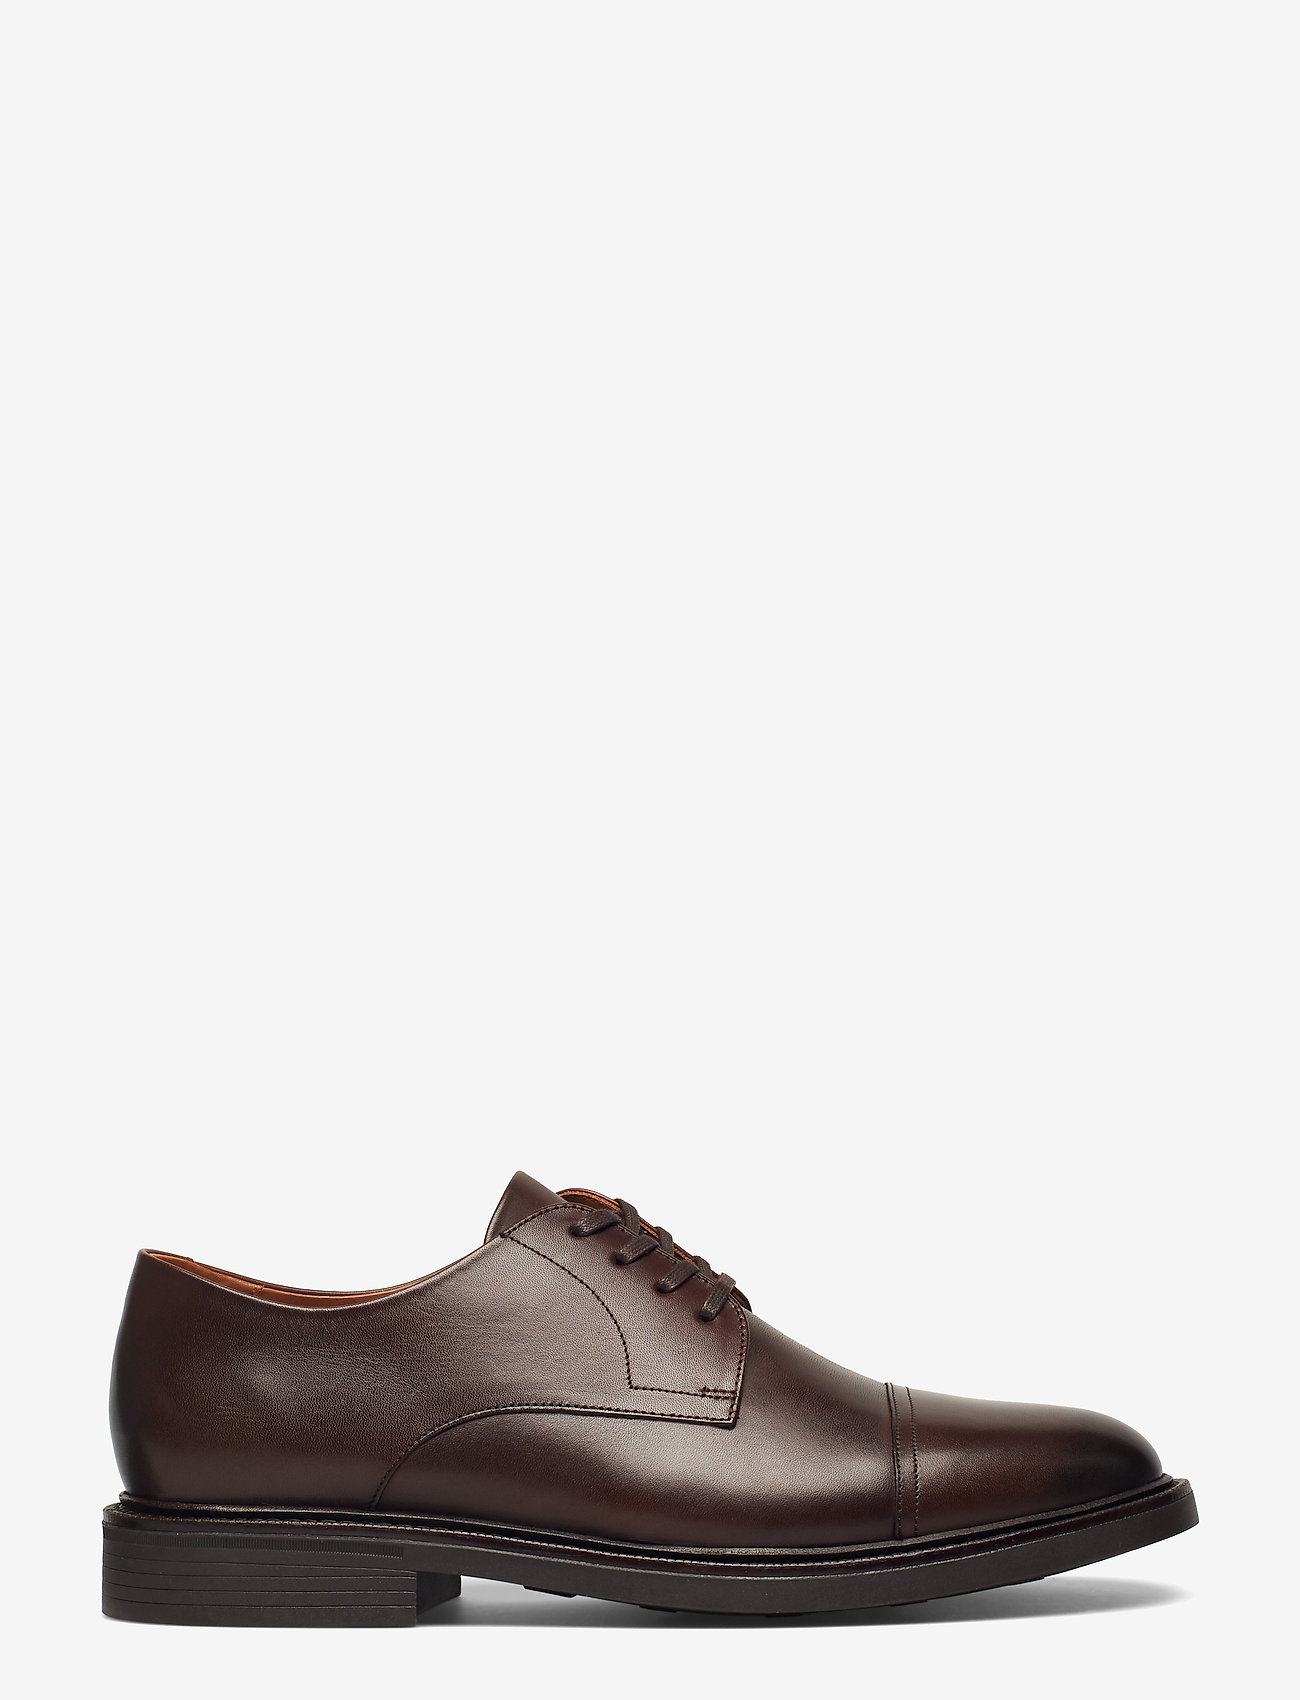 Asher Leather Cap Toe Shoe (Polo Brown 